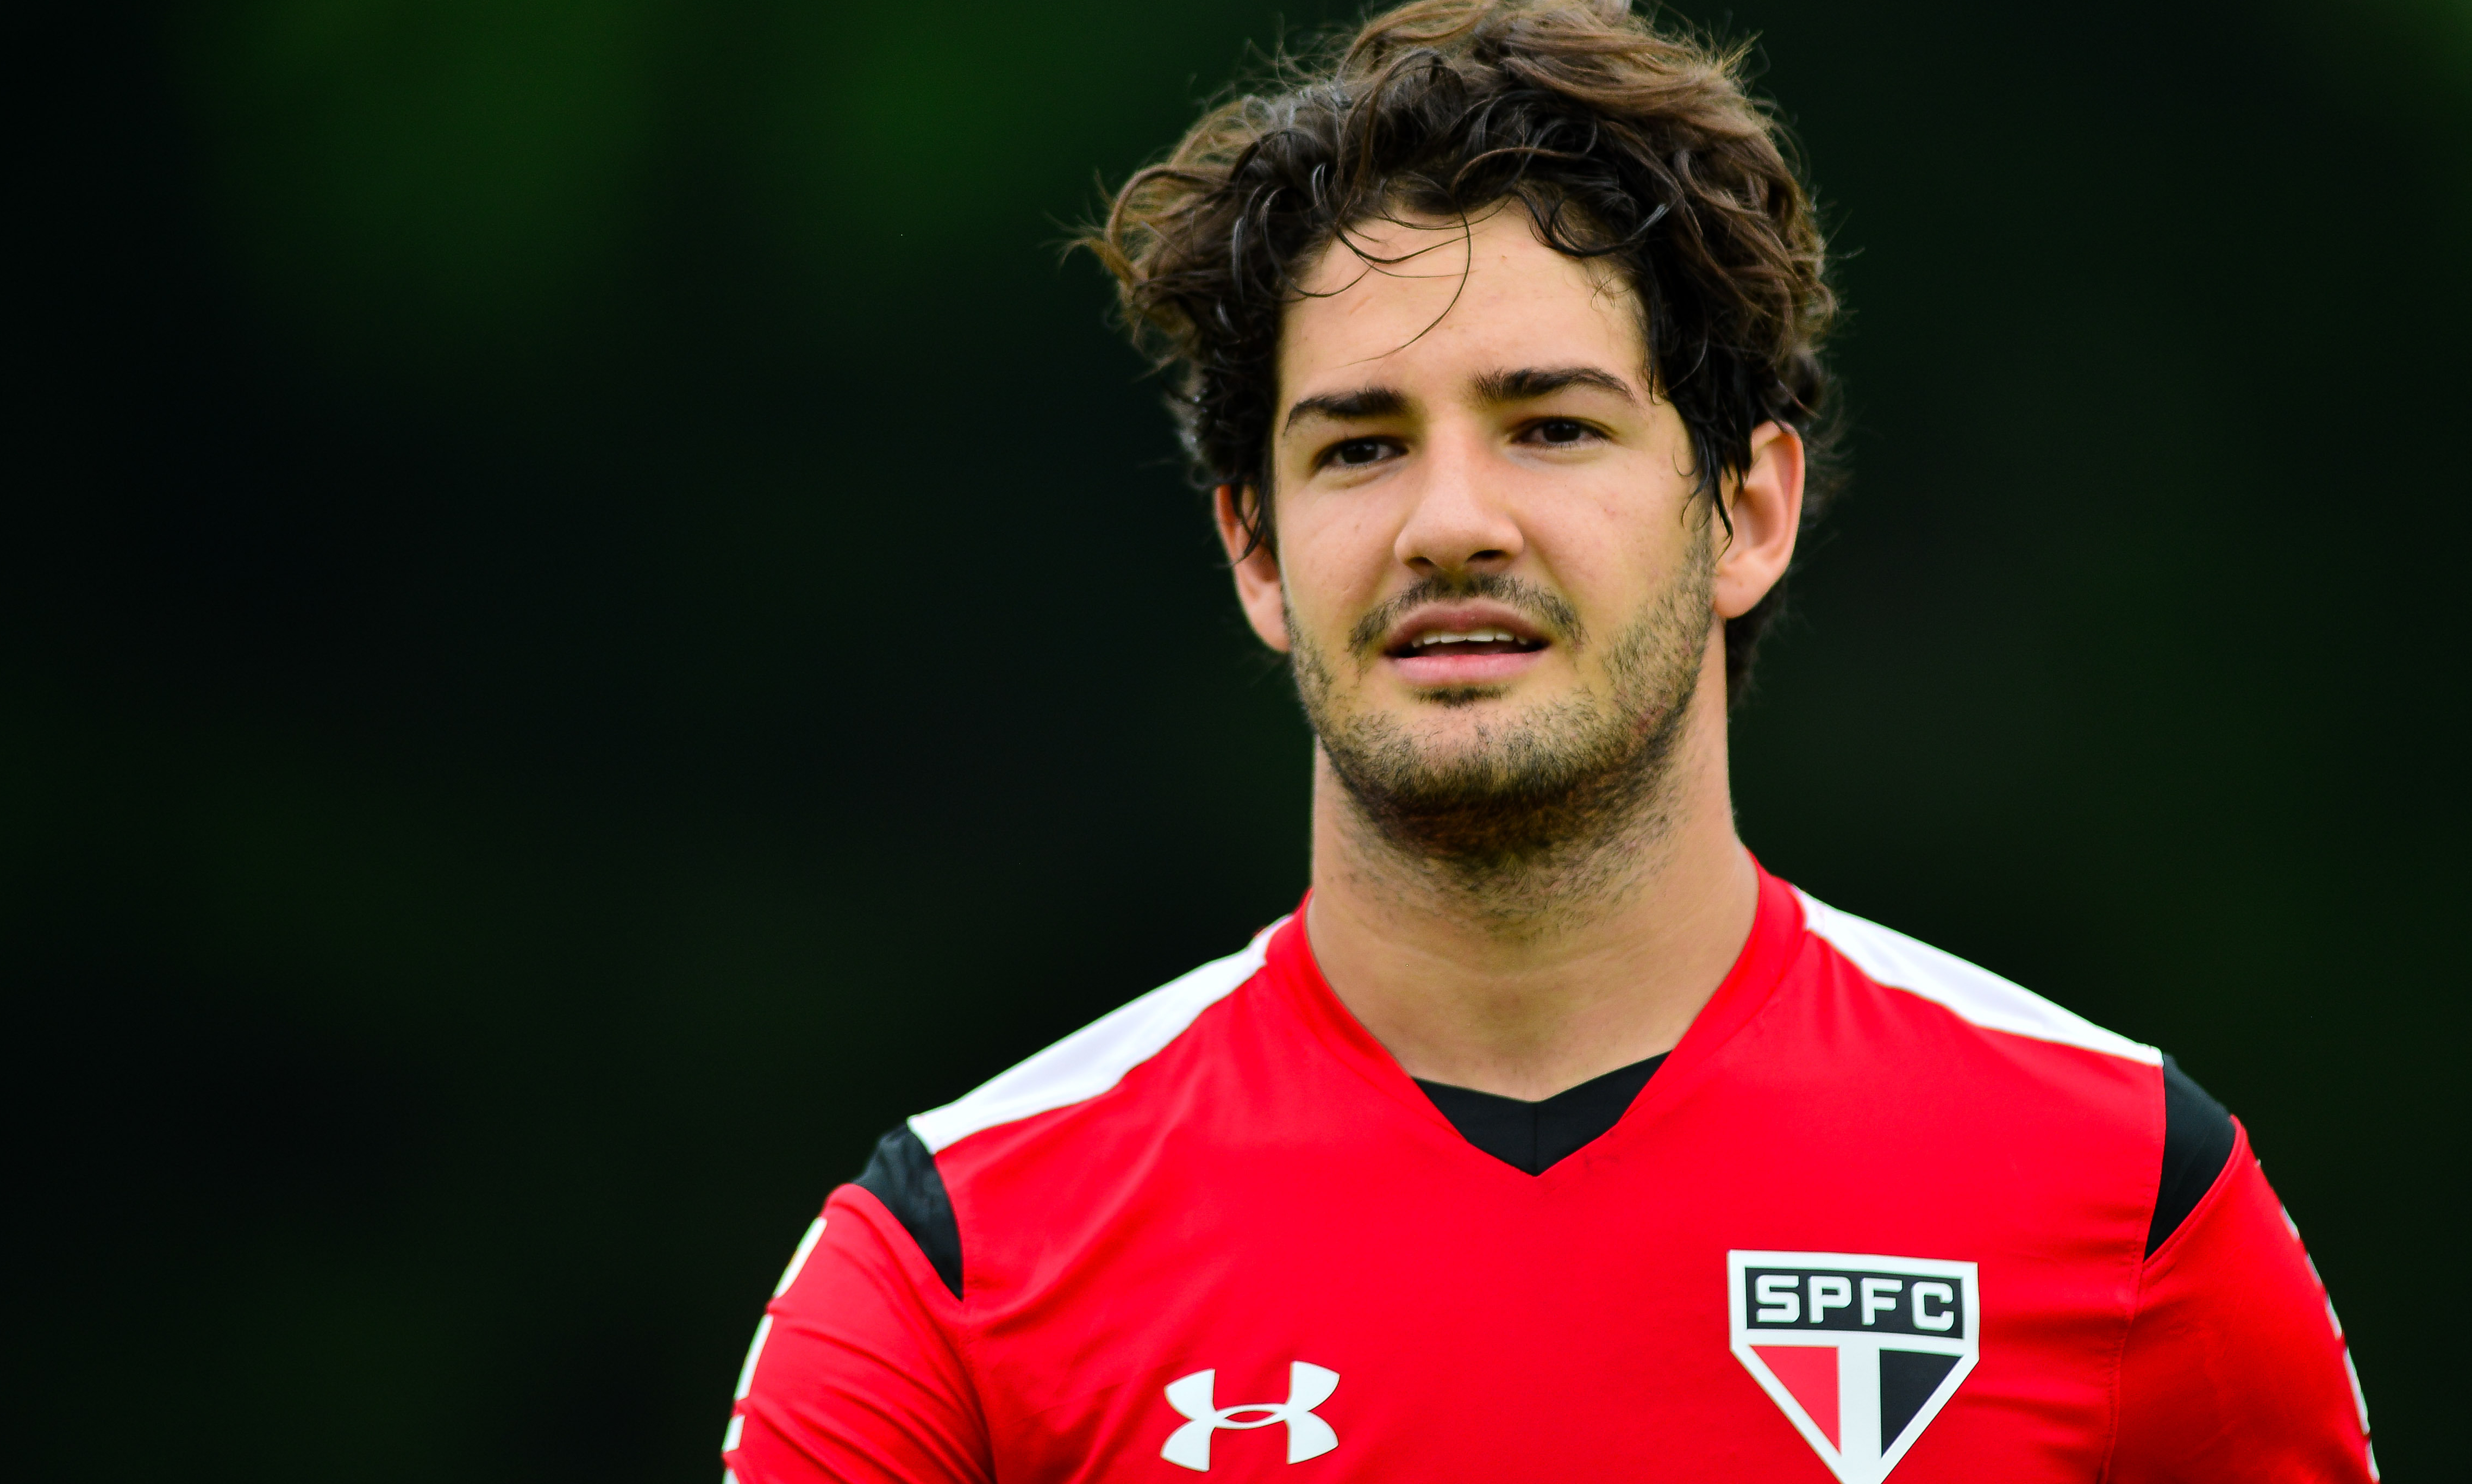 Pato still dreaming of playing for brazil